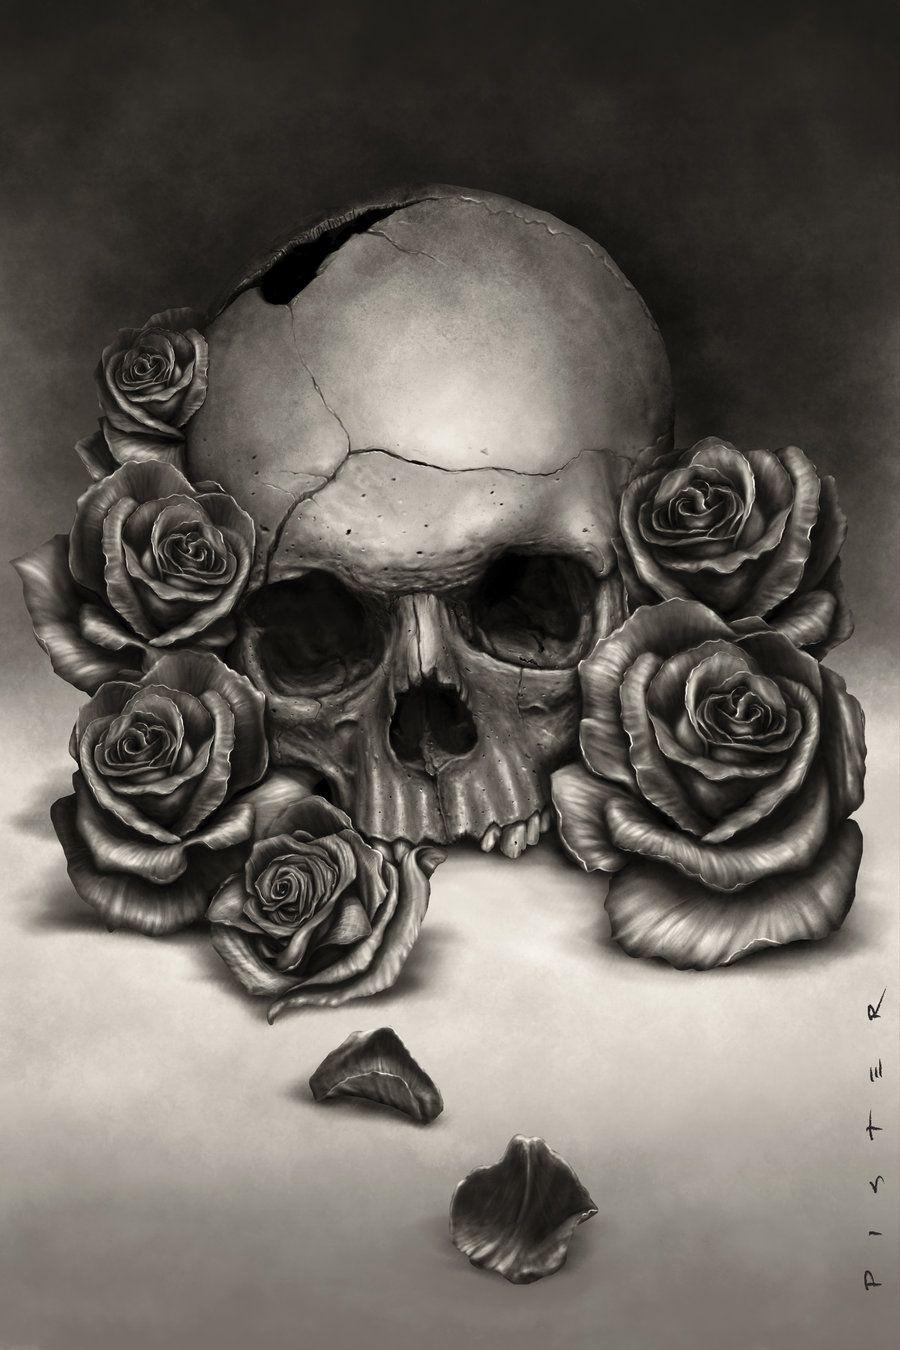 Skull and Roses Im a sucker for blue The original was grey and black  I love this wallpaper Enjoy  rS21WallPapers